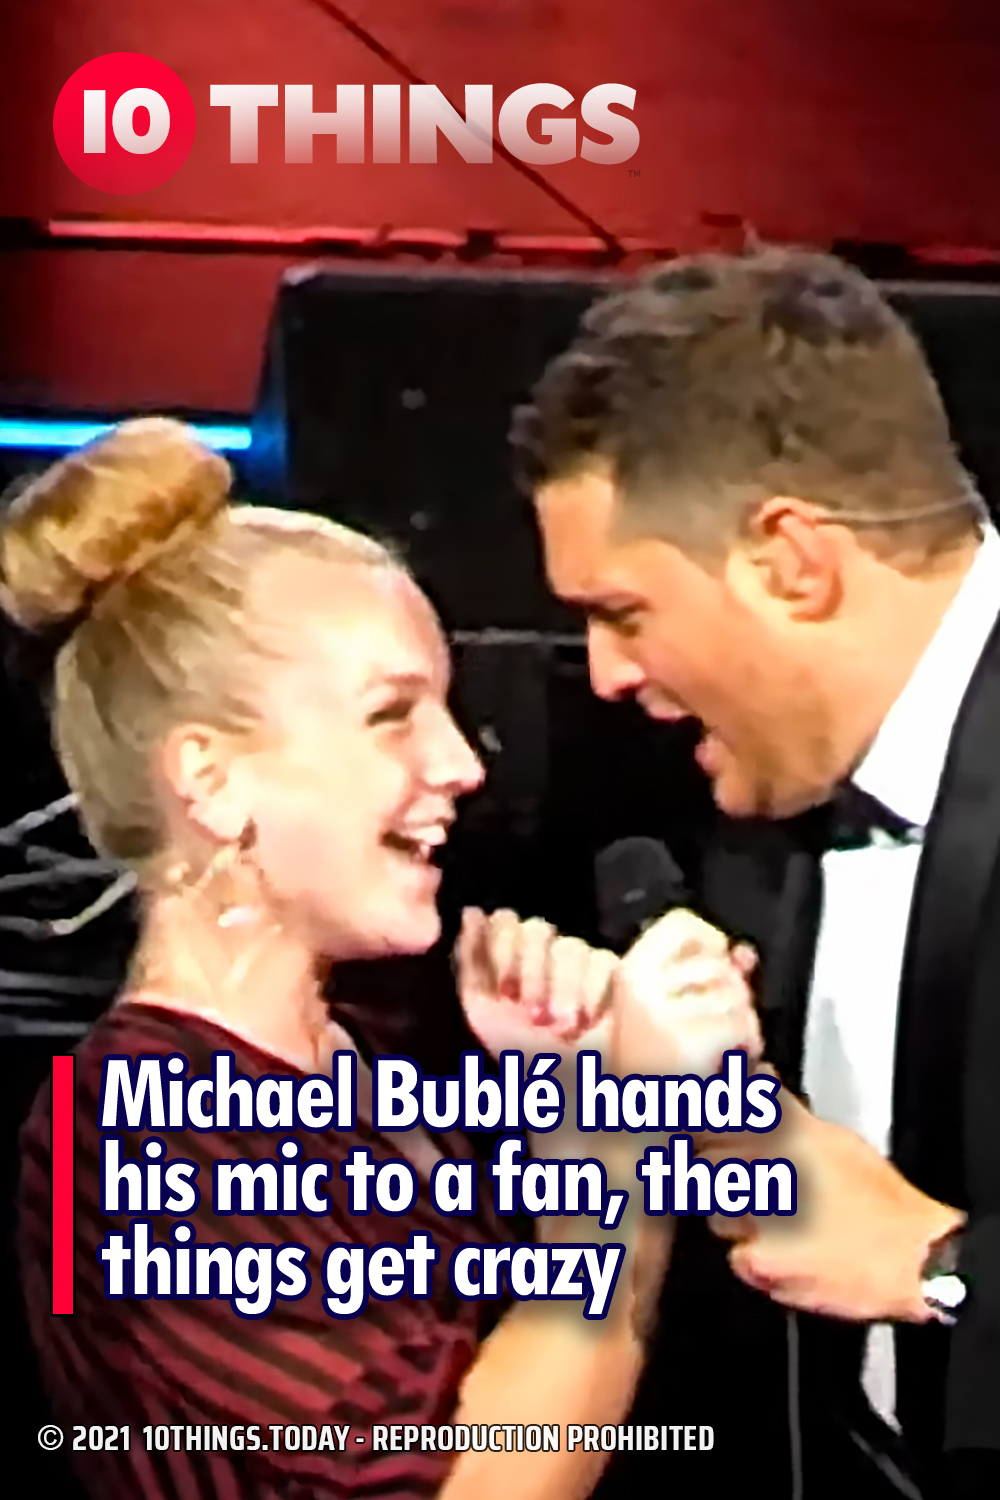 Michael Bublé hands his mic to a fan, then things get crazy